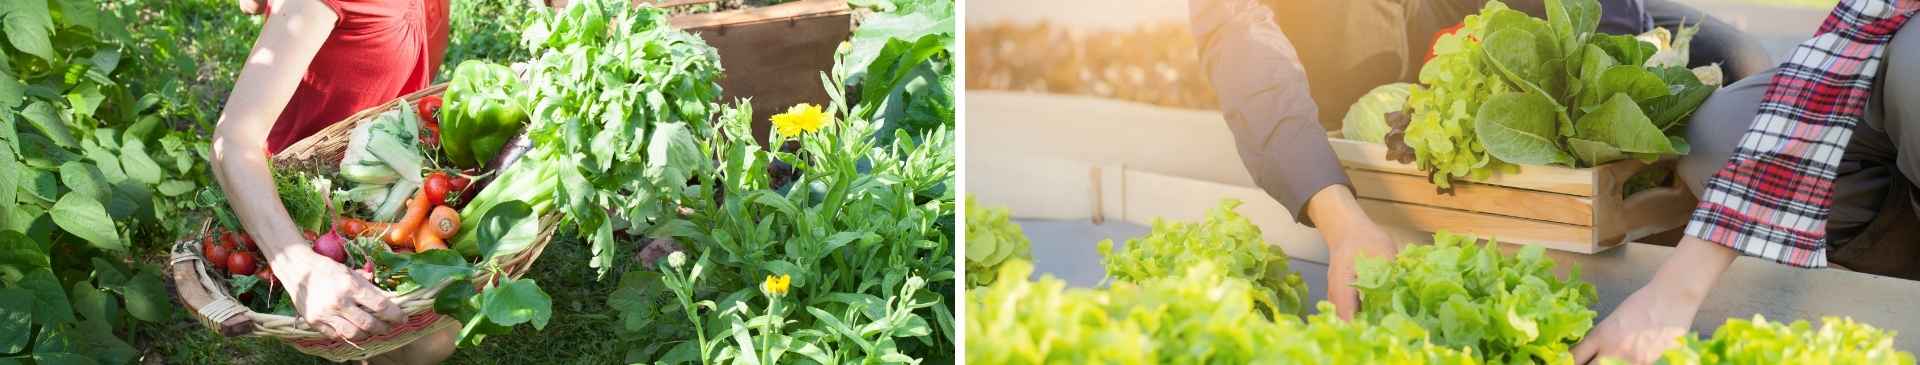 Why You Should Pick Many Types of Flowers and Vegetables Regularly